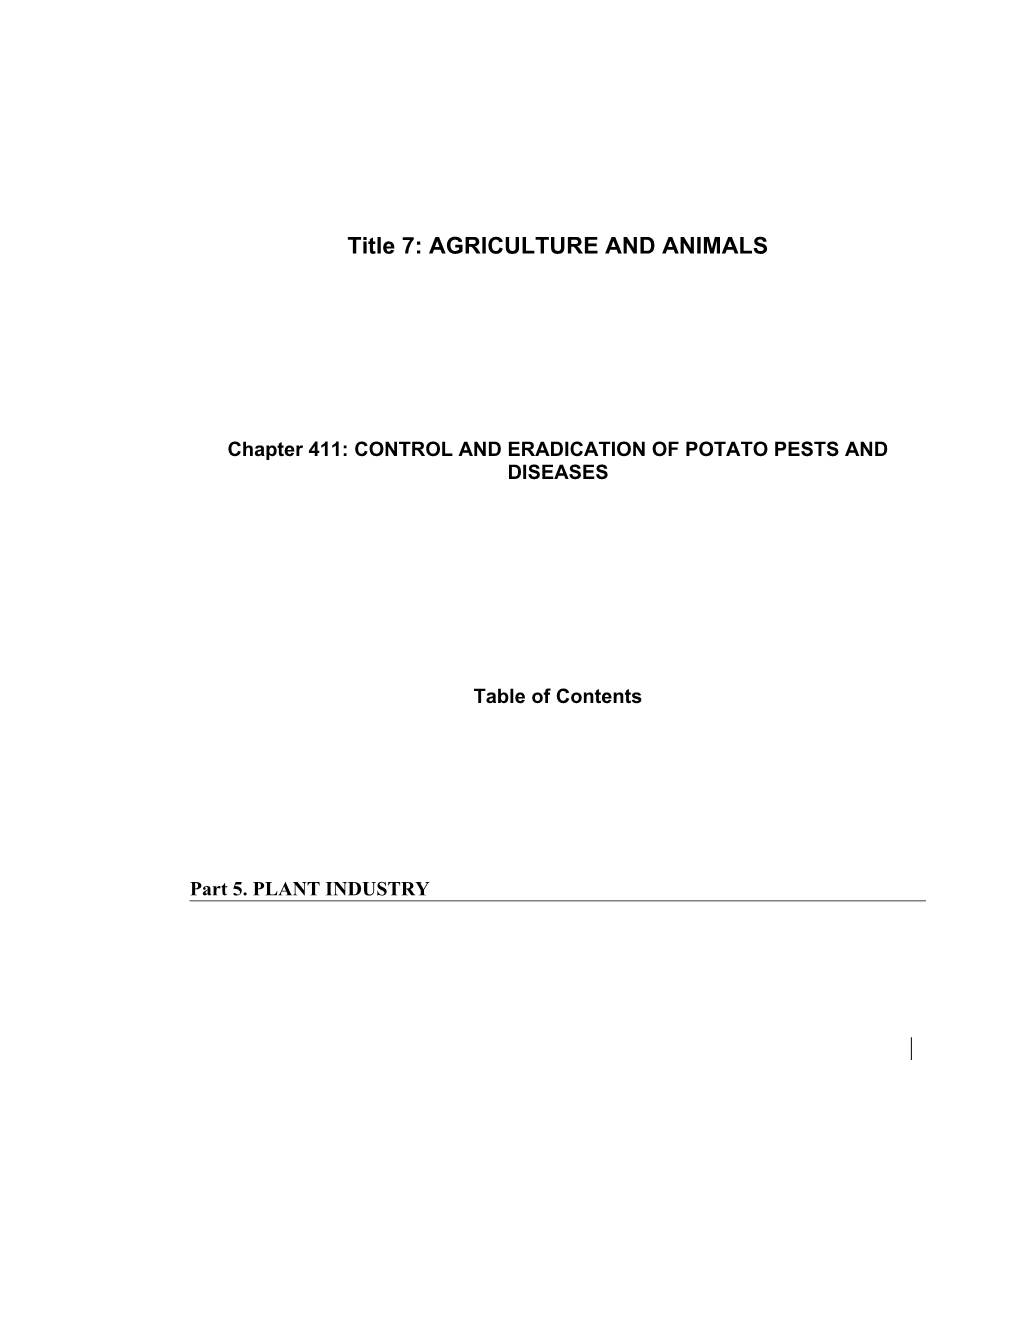 MRS Title 7, Chapter411: CONTROL and ERADICATION of POTATO PESTS and DISEASES